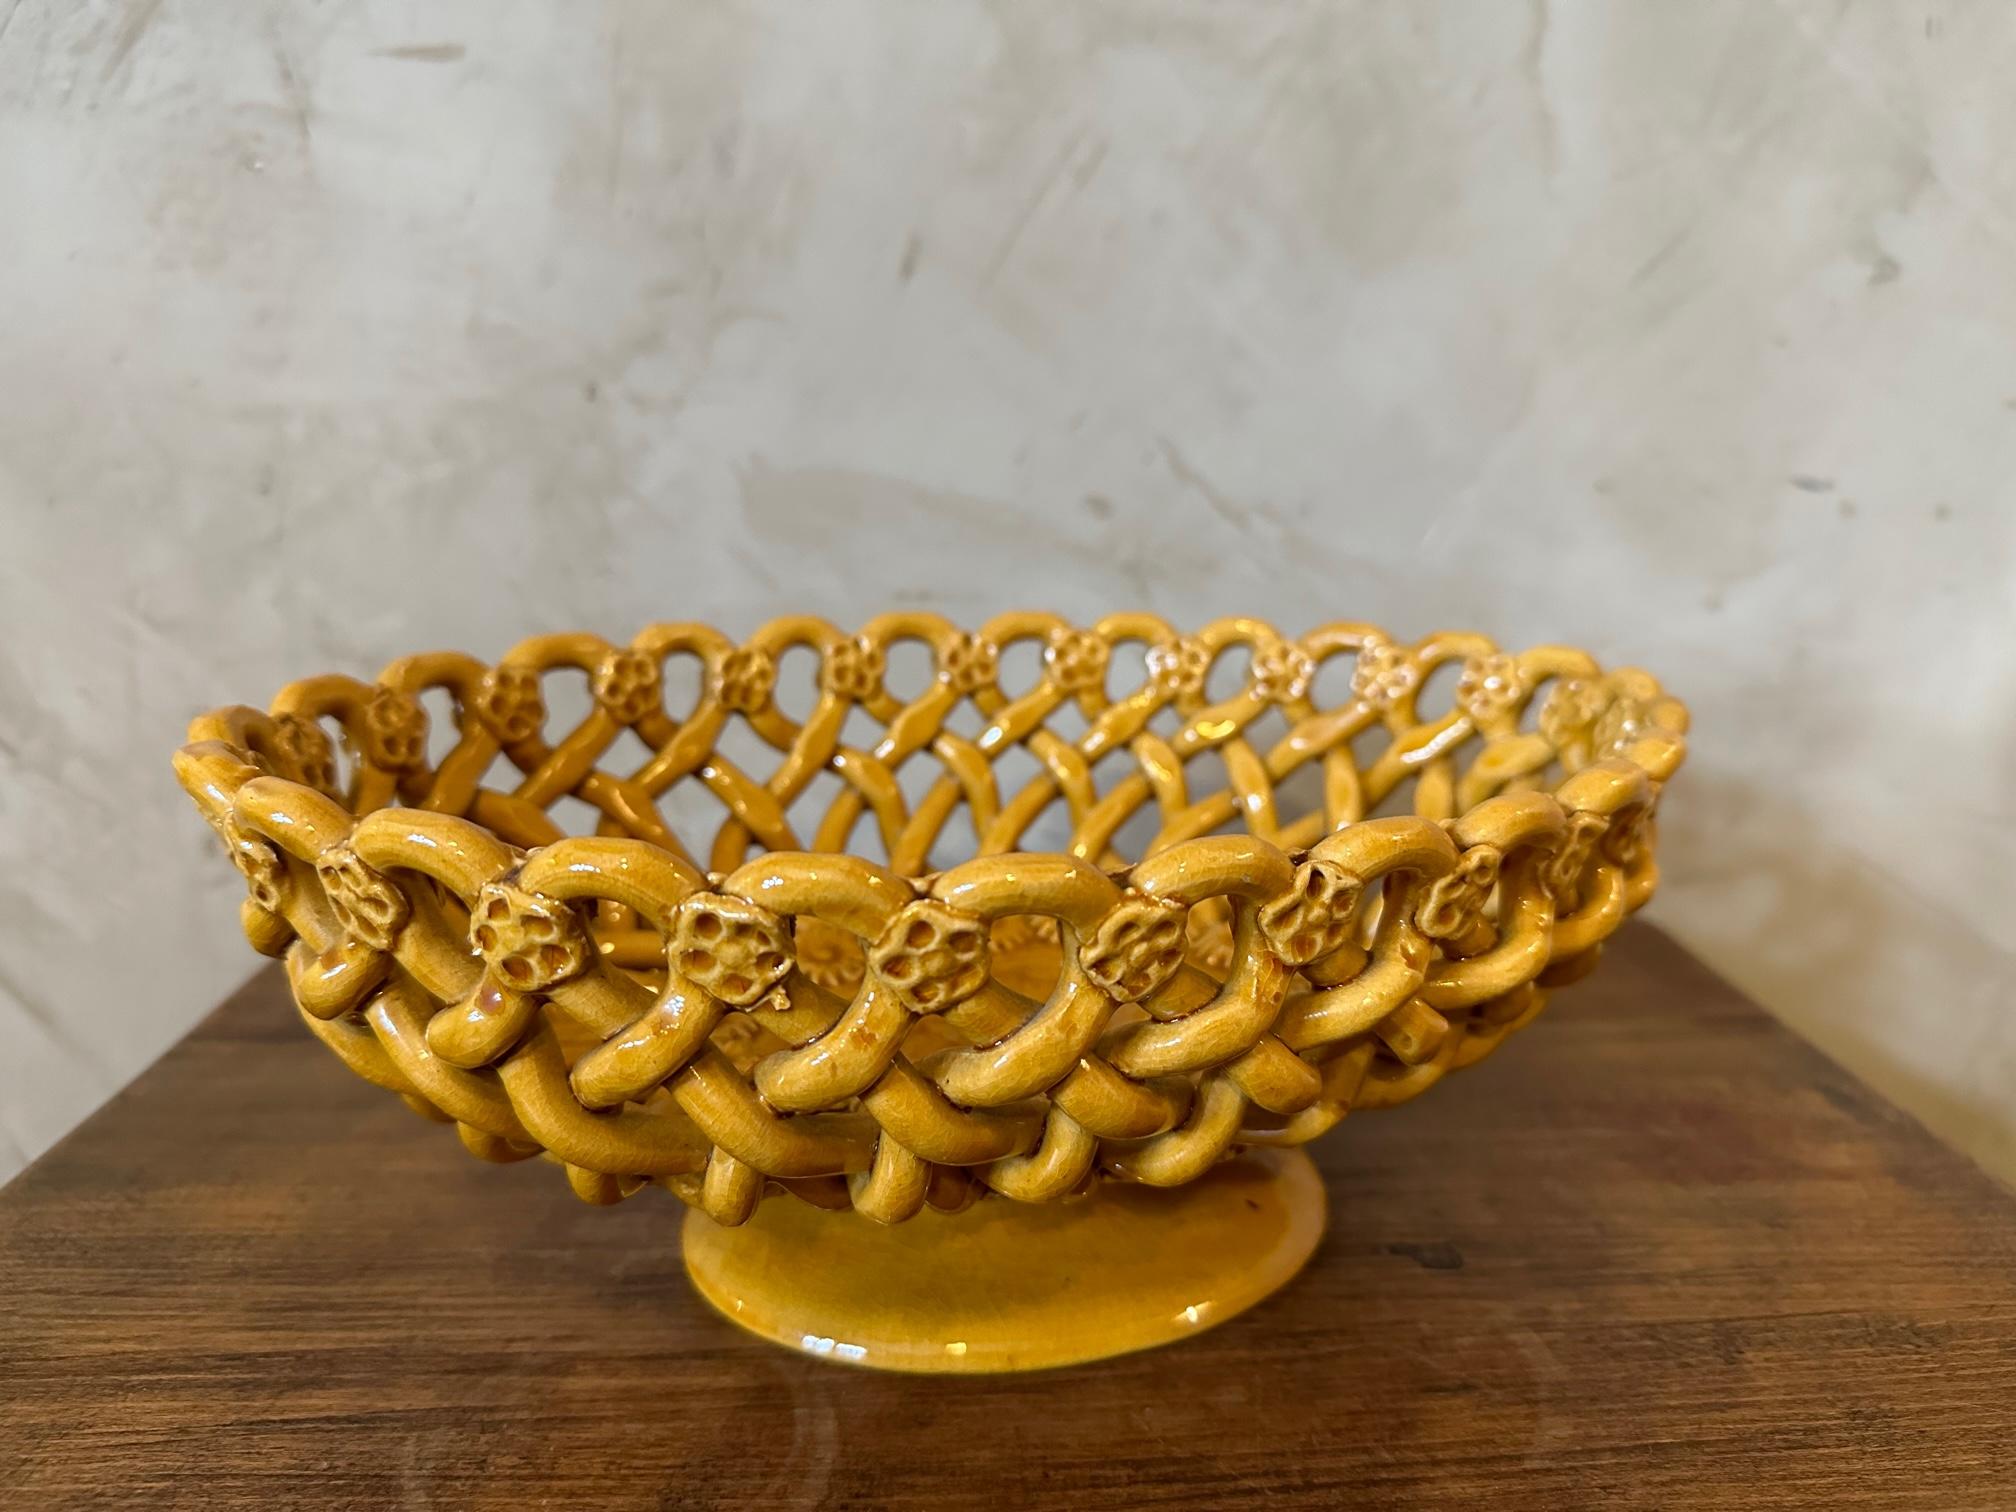 Very beautiful camel-colored braided ceramic bowl dating from the 1950s by pichon in Uzes.
Very good condition and superb quality.
The Pichon d'Uzès factory is one of the rare fine pottery companies to have survived since the 19th century. It